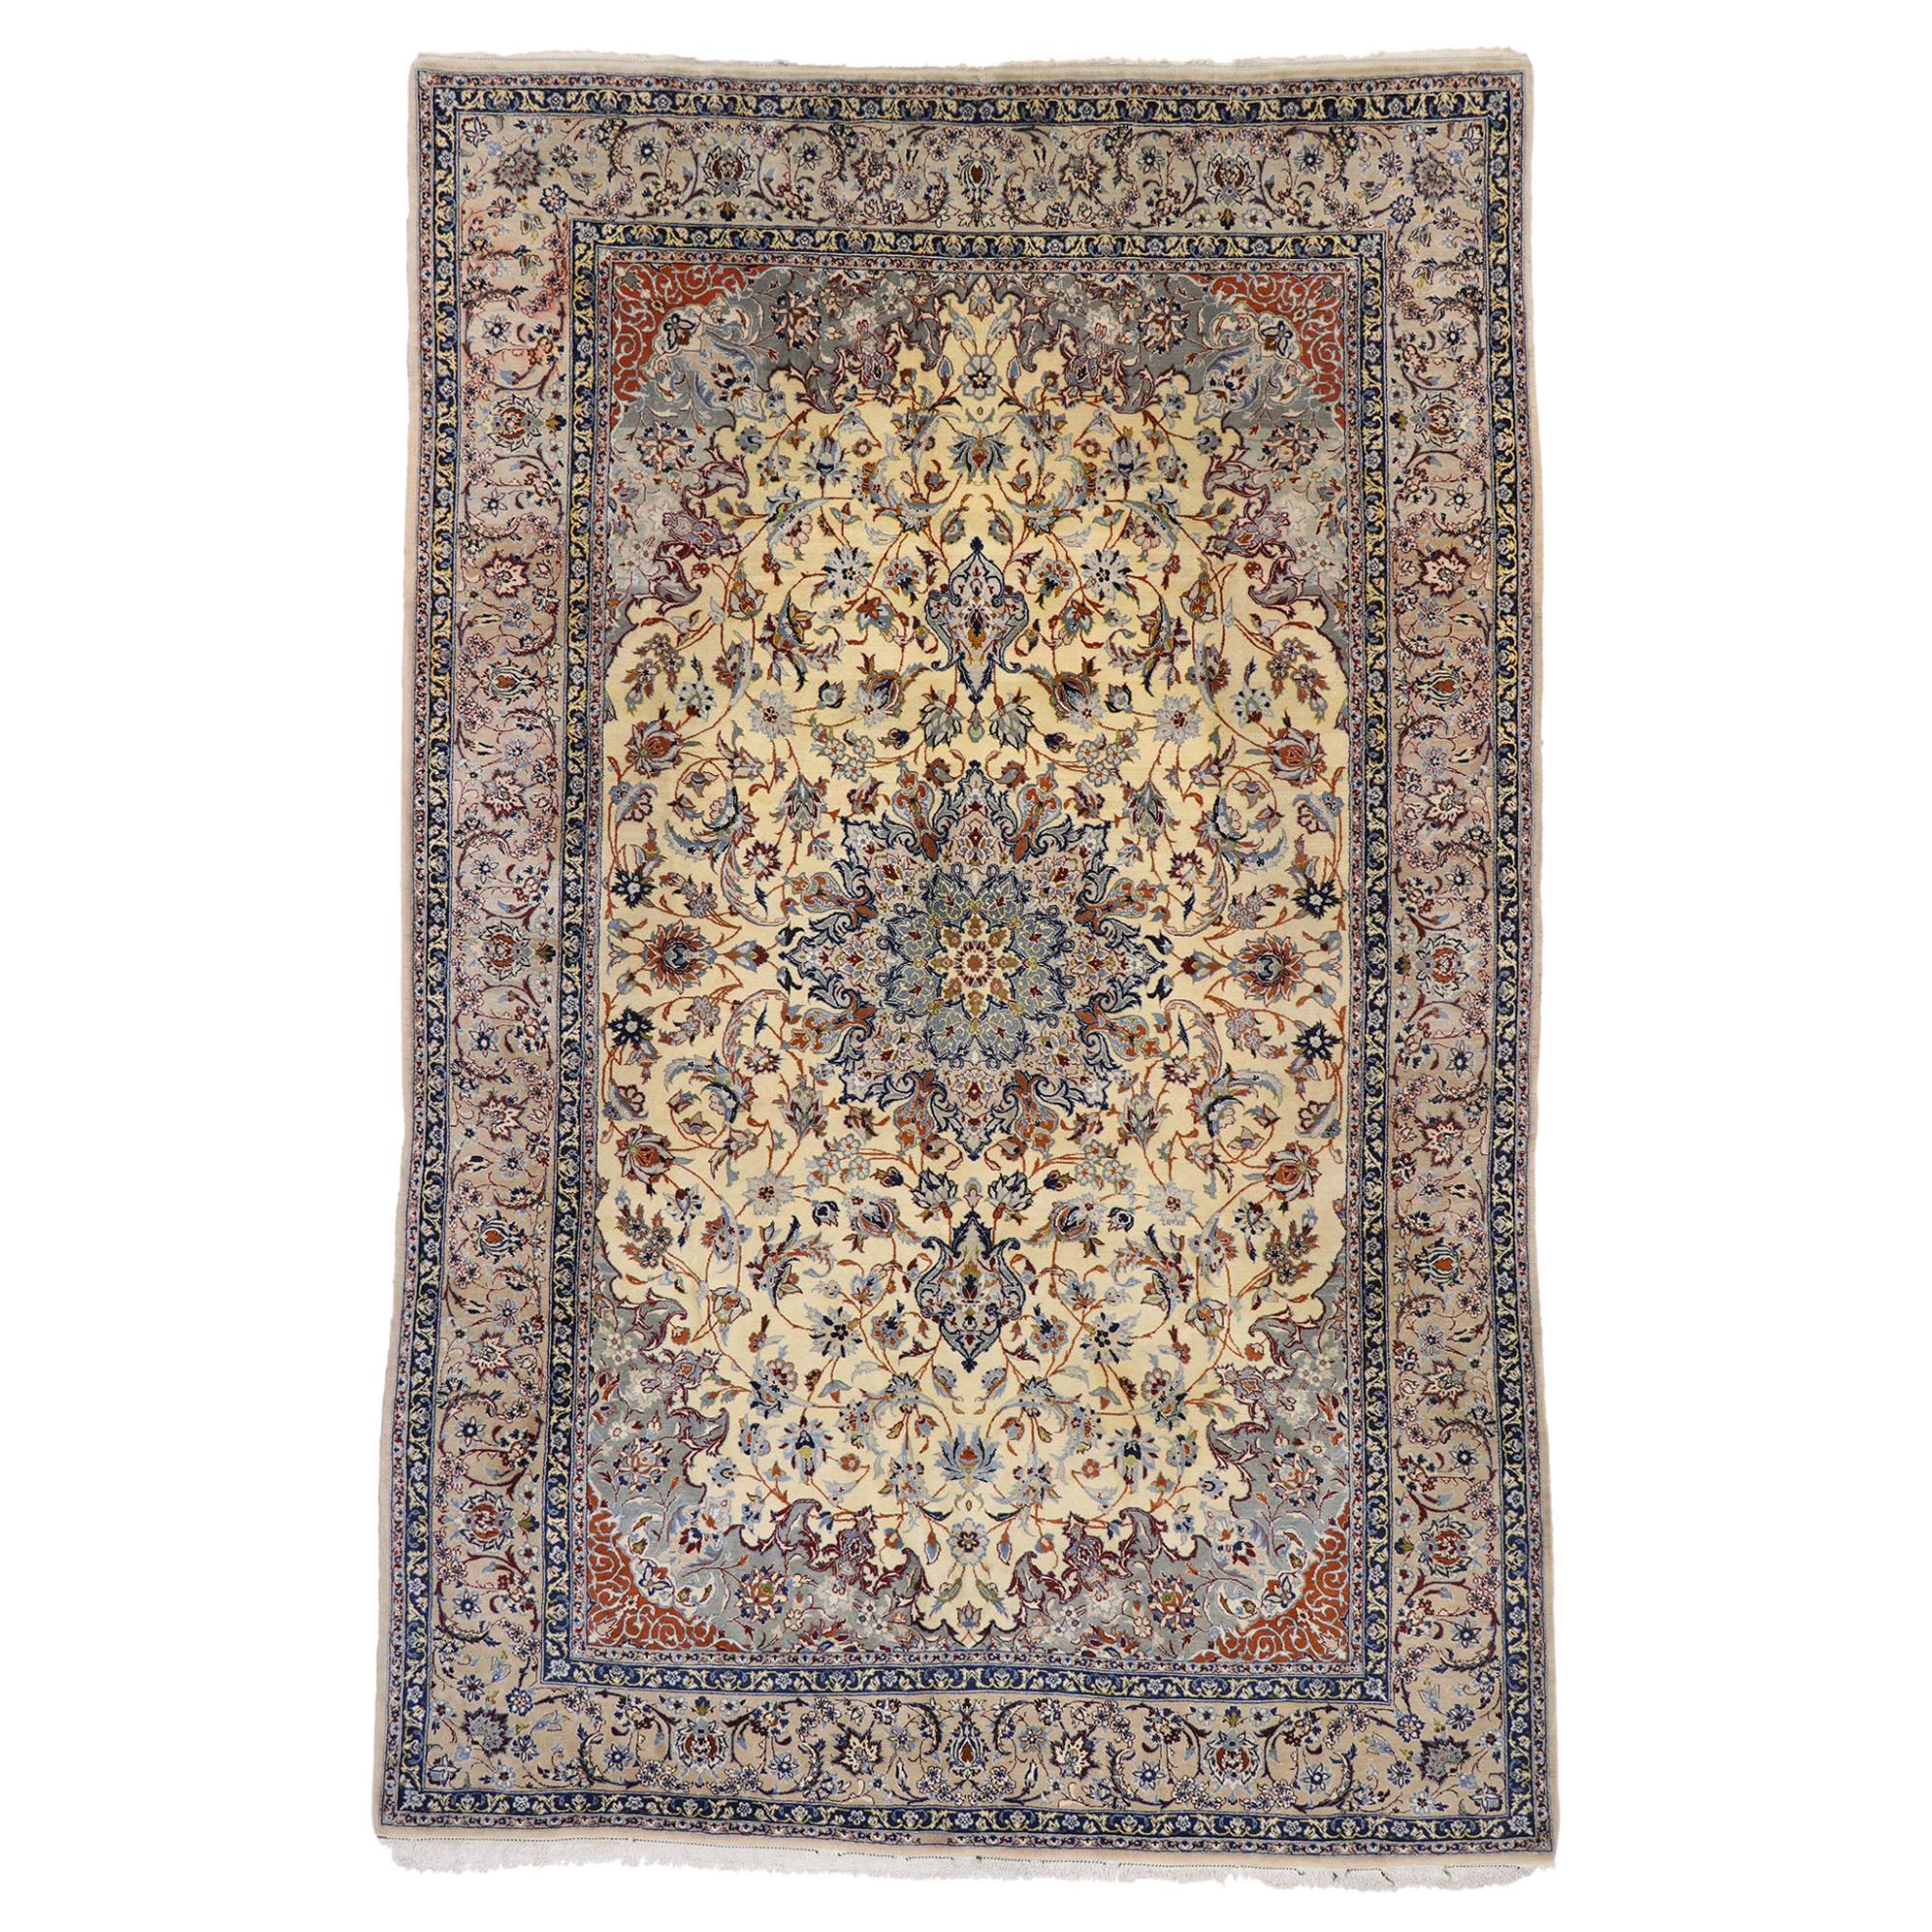 Vintage Persian Nain Rug with Art Nouveau Rococo Style